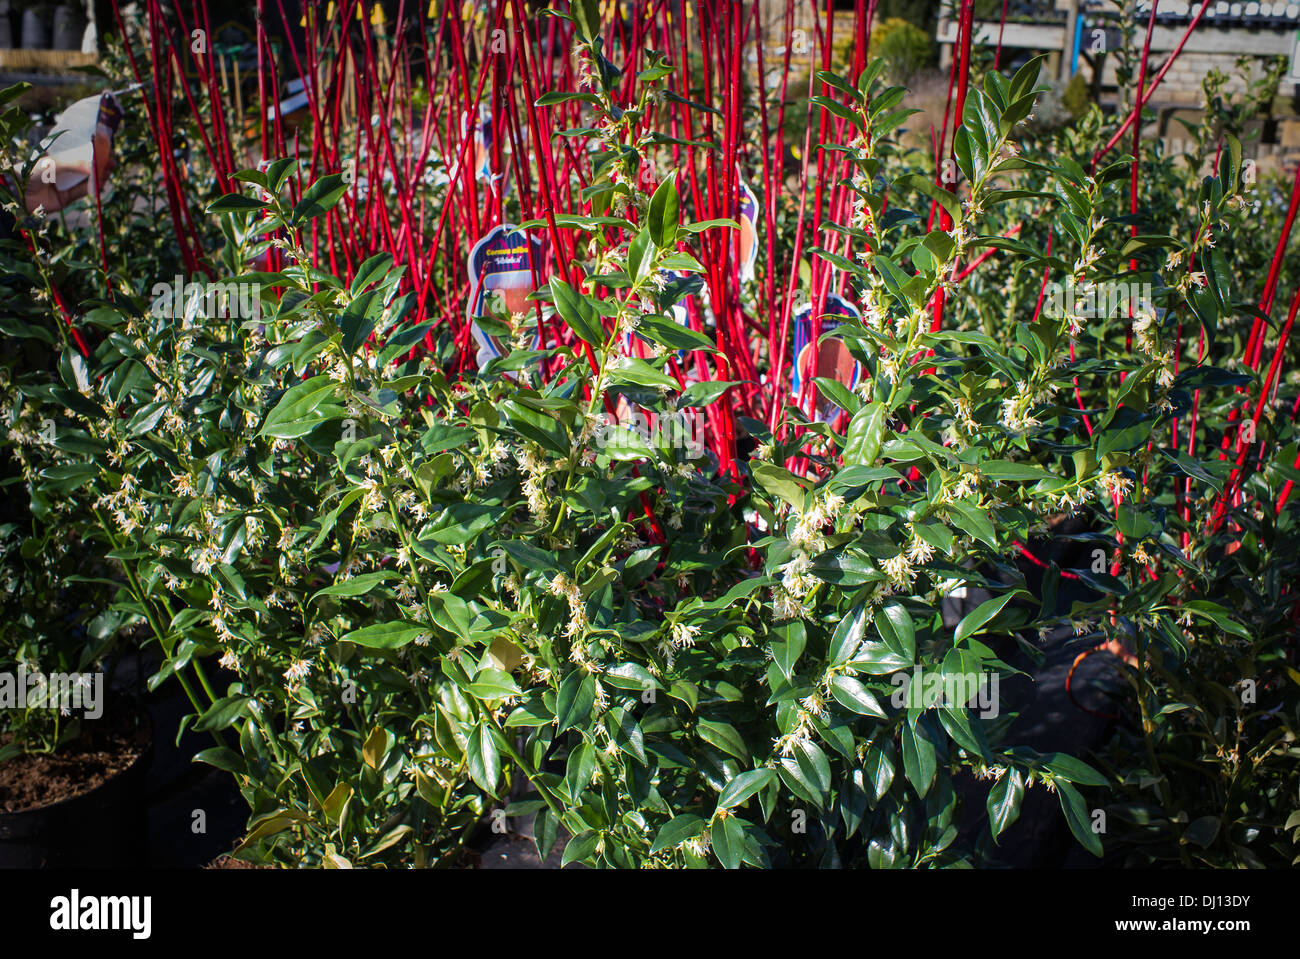 Display of Sarcococca plants for sale Stock Photo